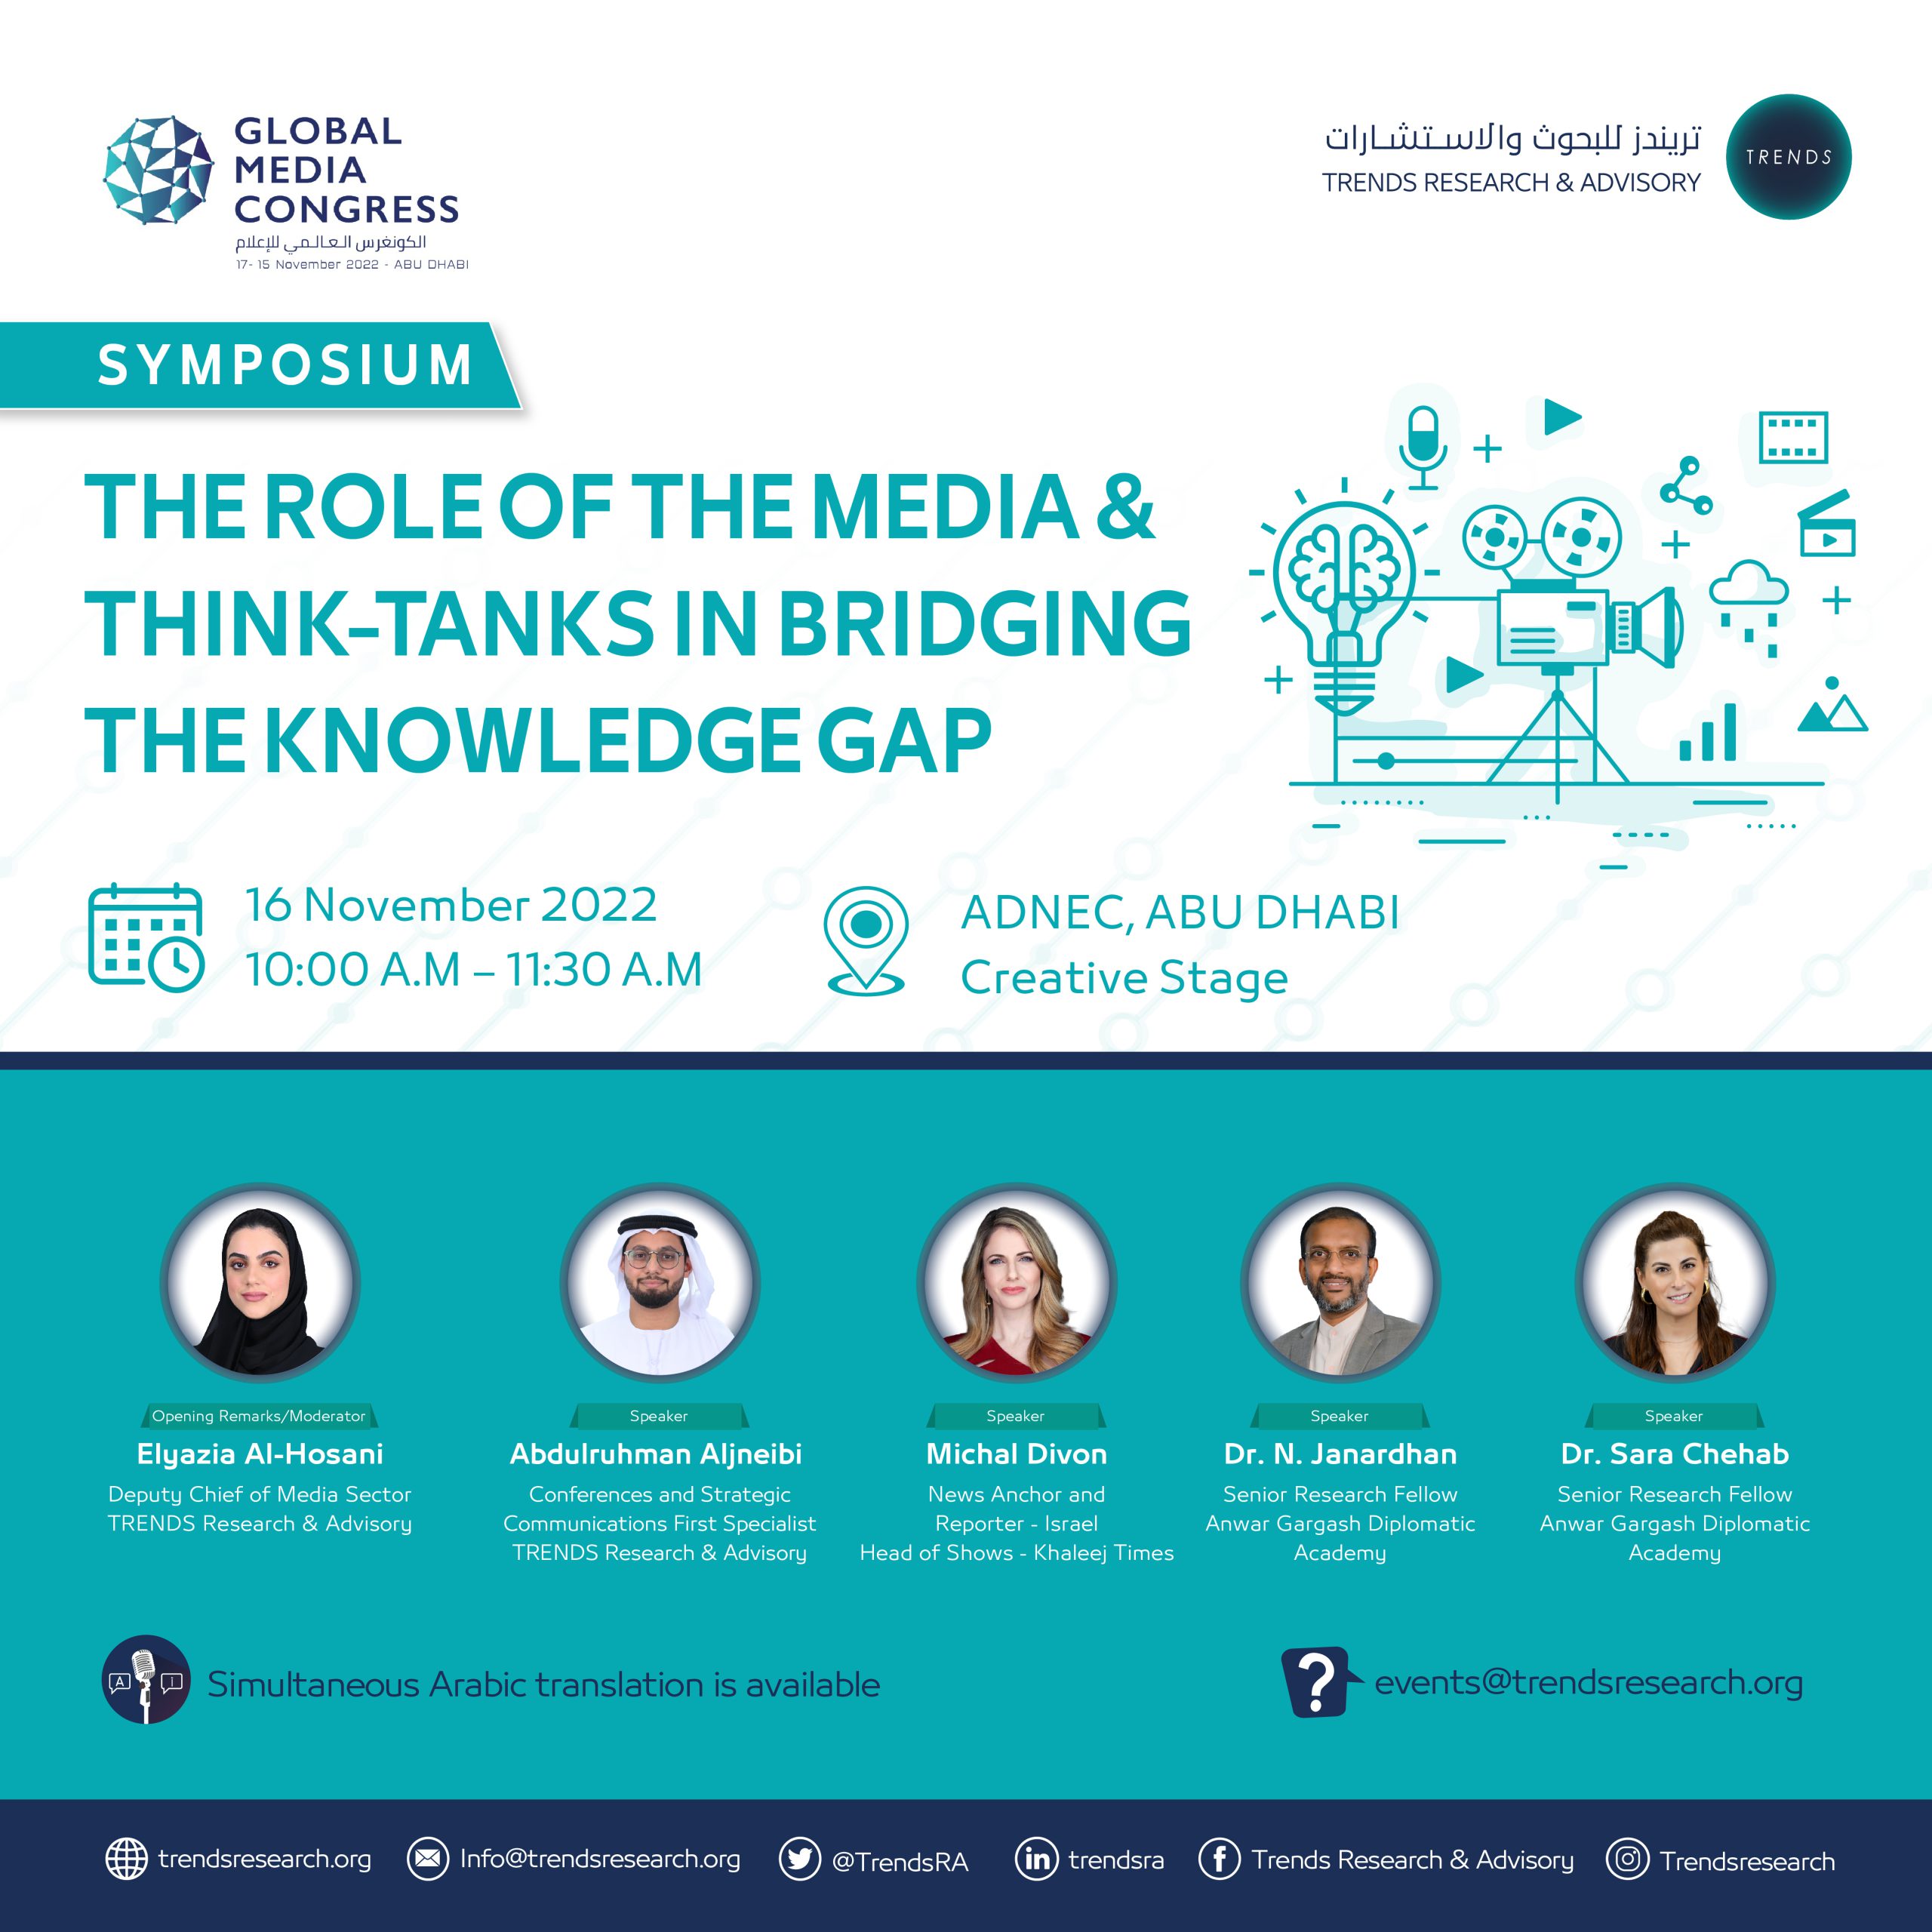 The Role of the Media & Think-Tanks in Bridging the Knowledge Gap